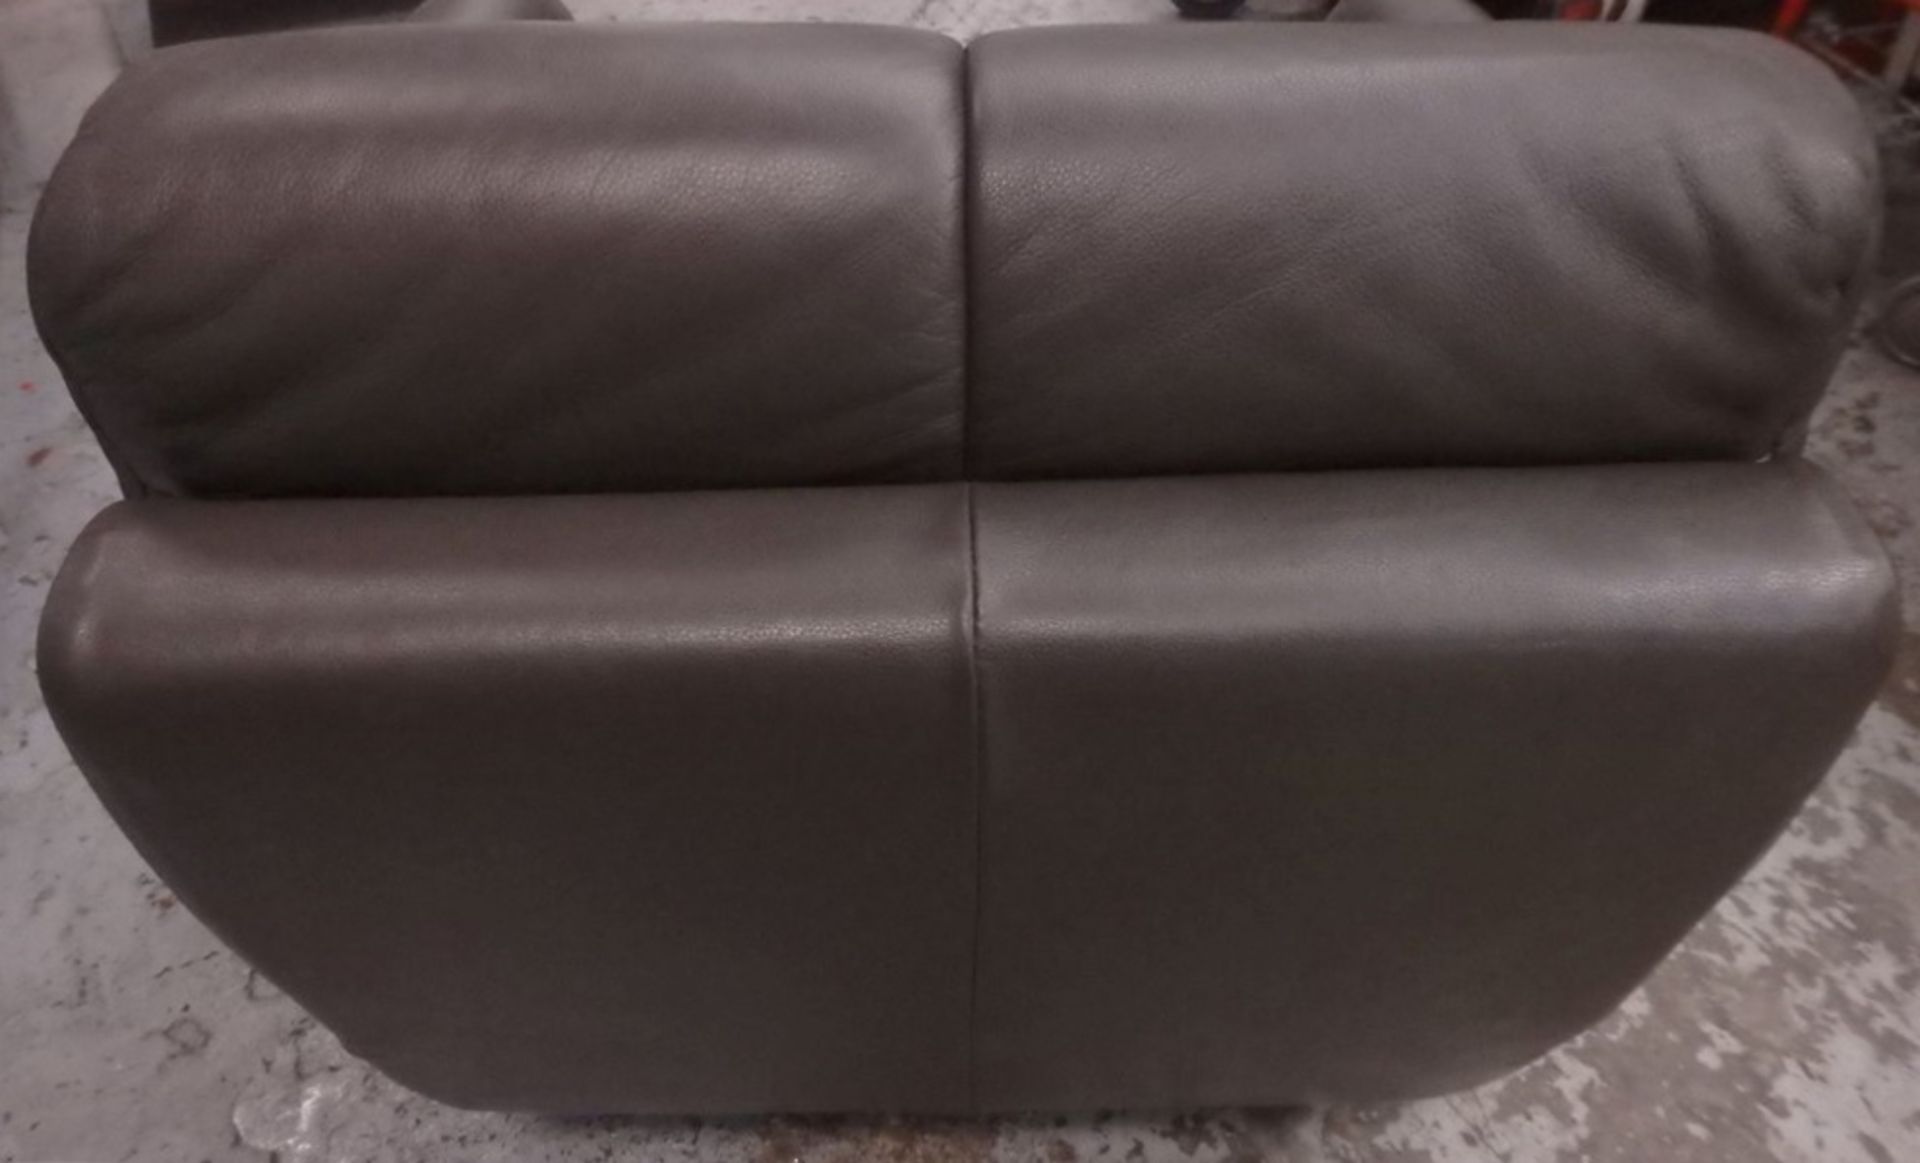 1 x Grey Leather Chair - Features A Fetching Fendi-style Design - L90xD100x80cm - CL050 - Ref: - Image 4 of 5